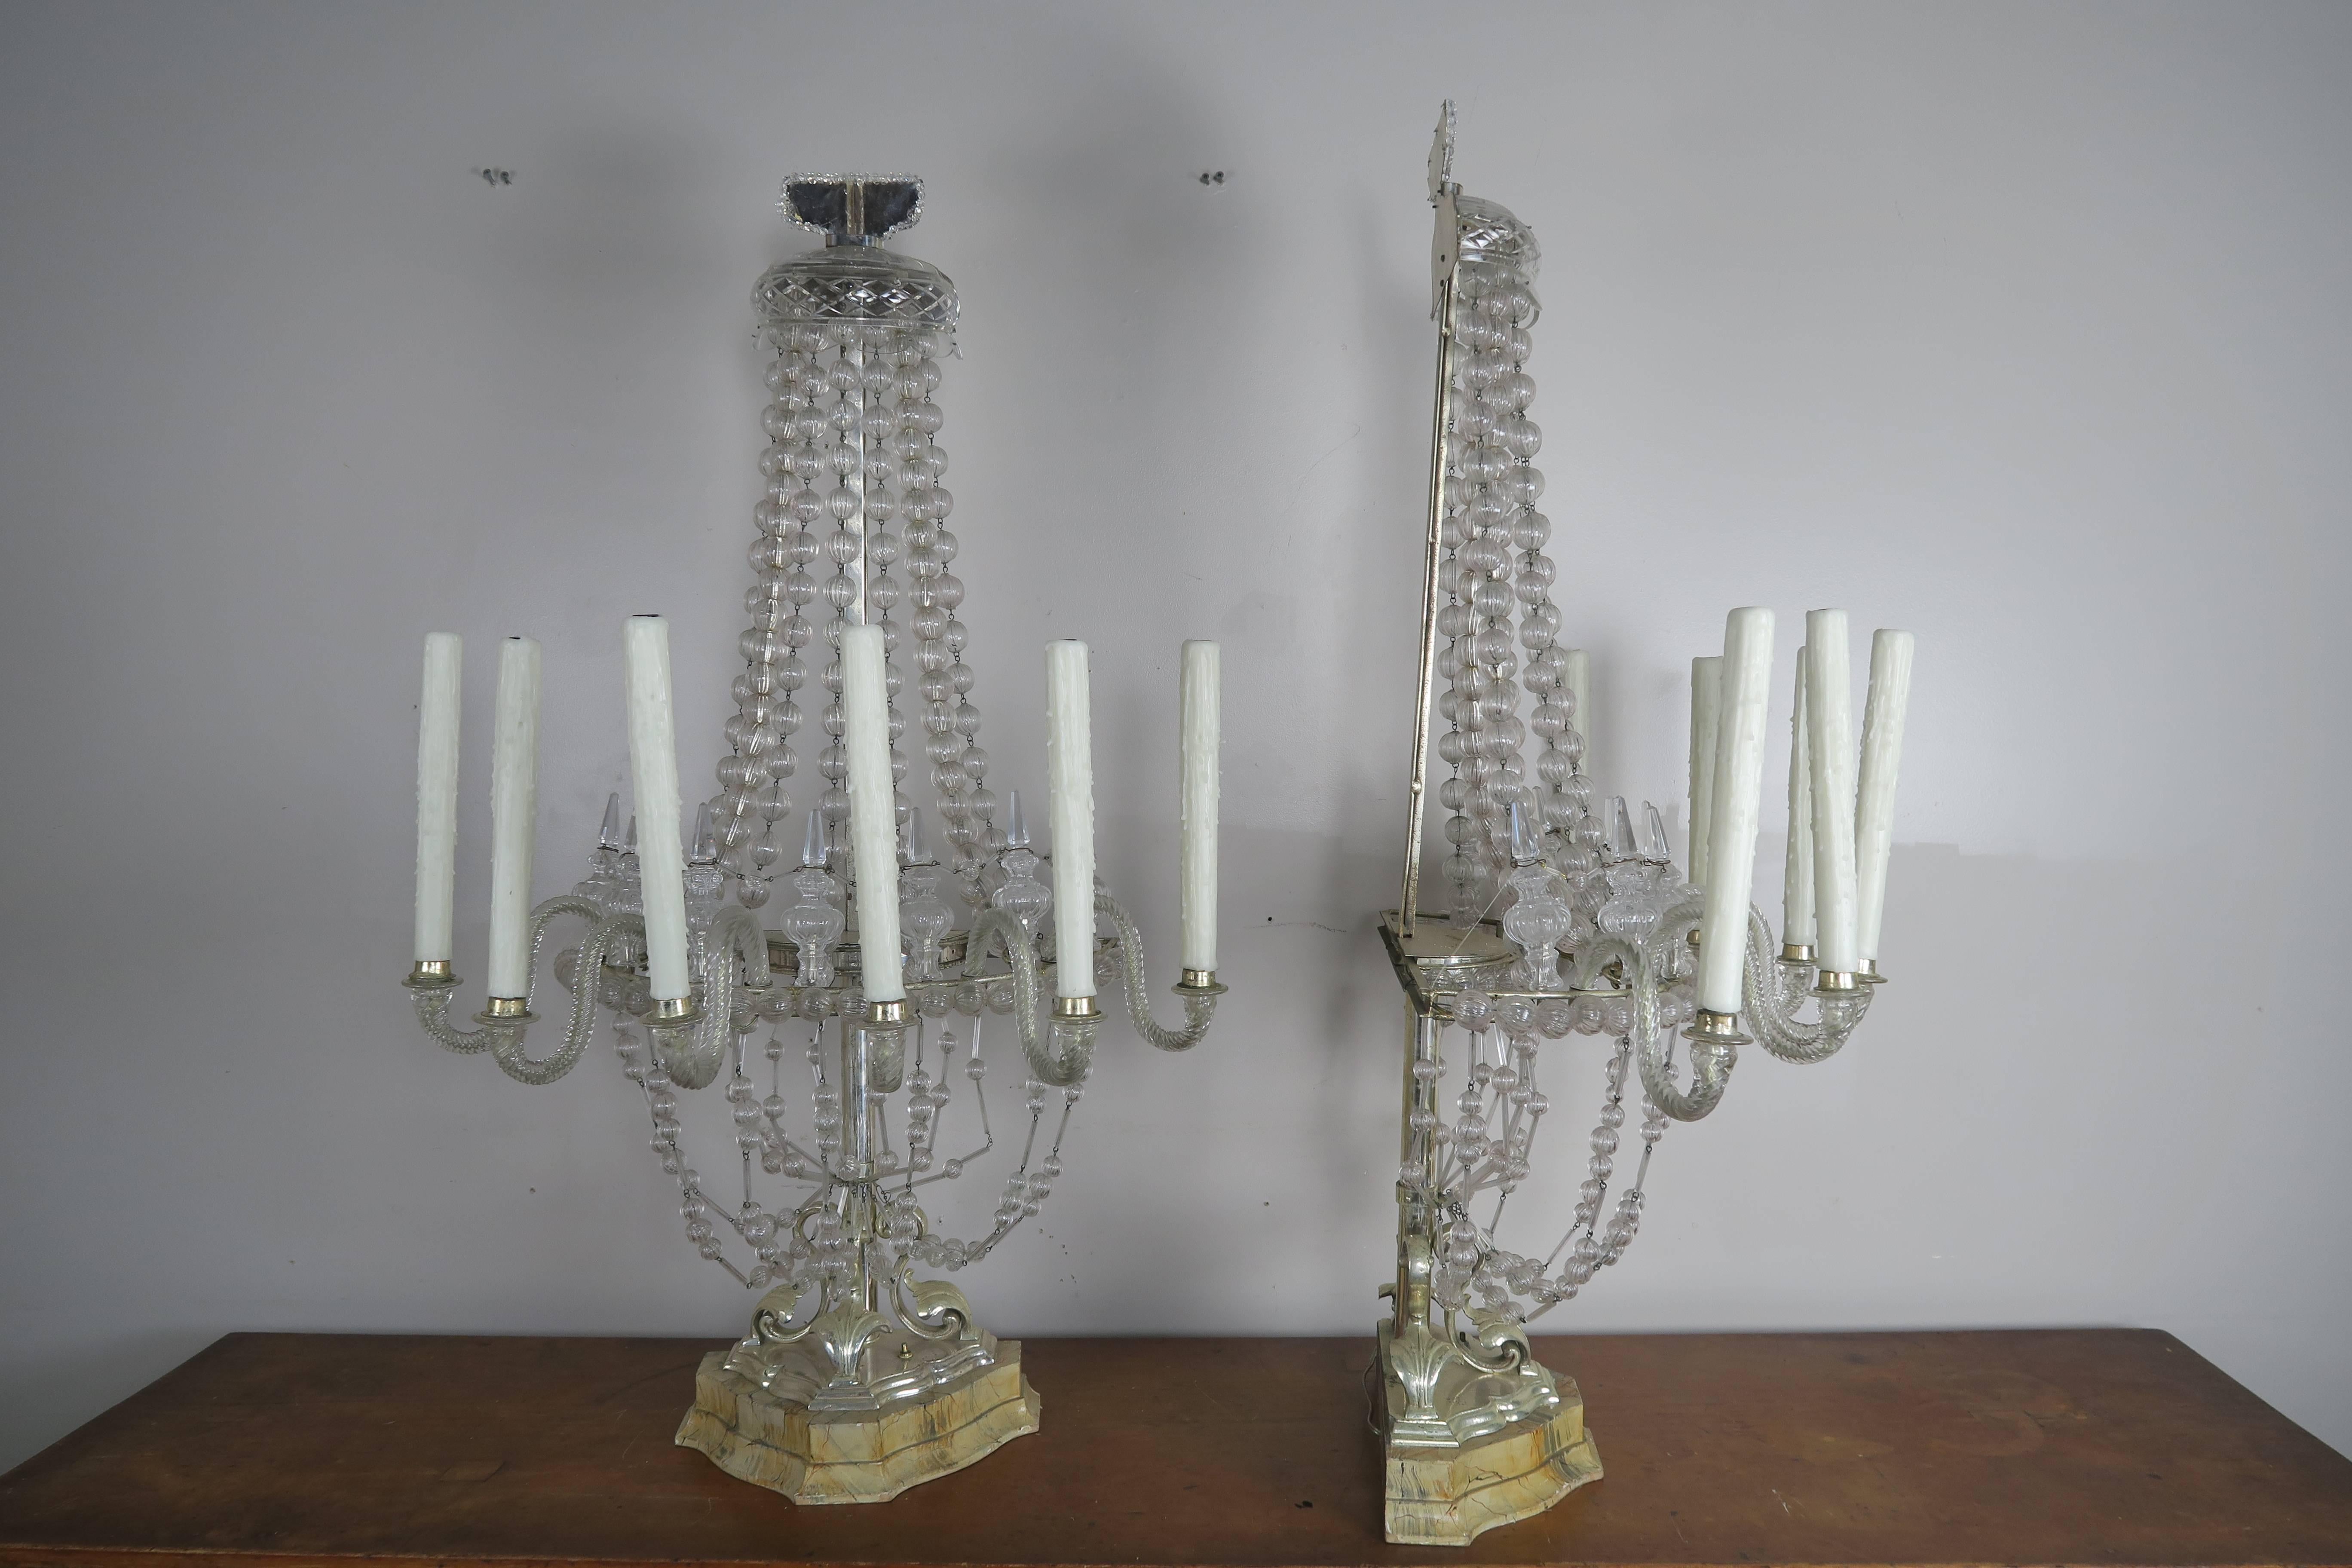 Pair of unique Venetian six-light monumental handblown Murano glass lamps made with garlands of handblown balls. The lamp sits on silver plated and faux painted marble bases. The lamps have been newly rewired with American sockets and are ready to